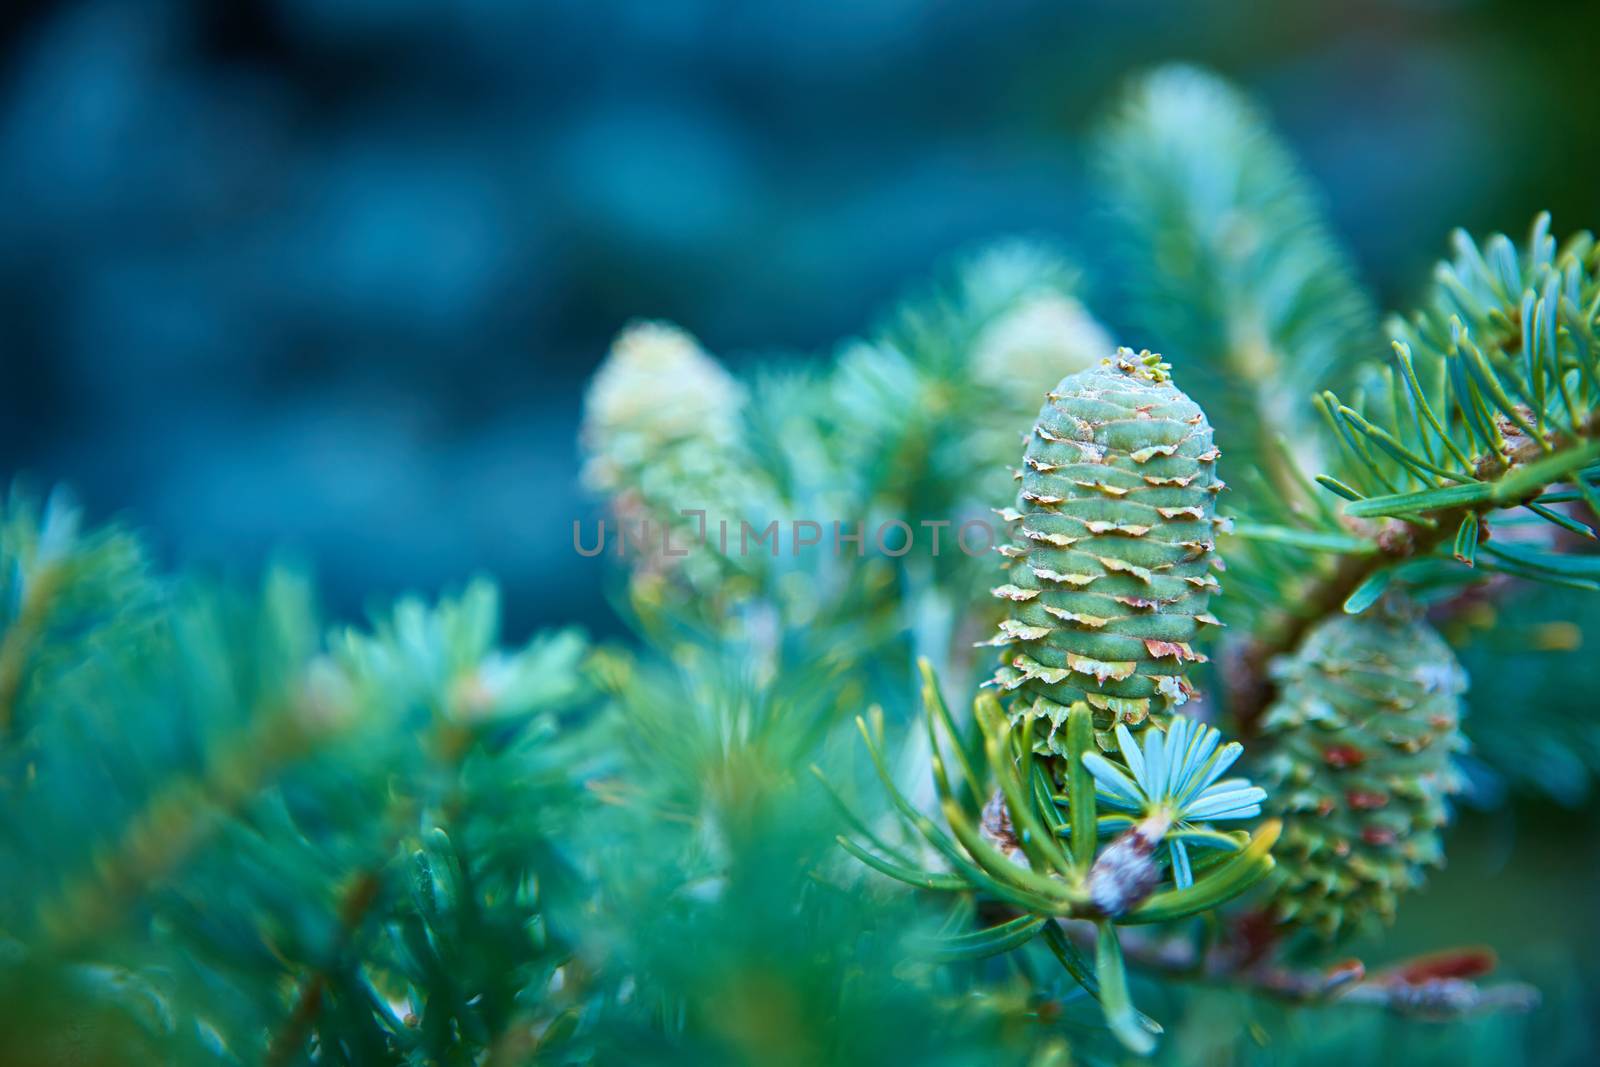 Young shoots of pine trees in the forest spring